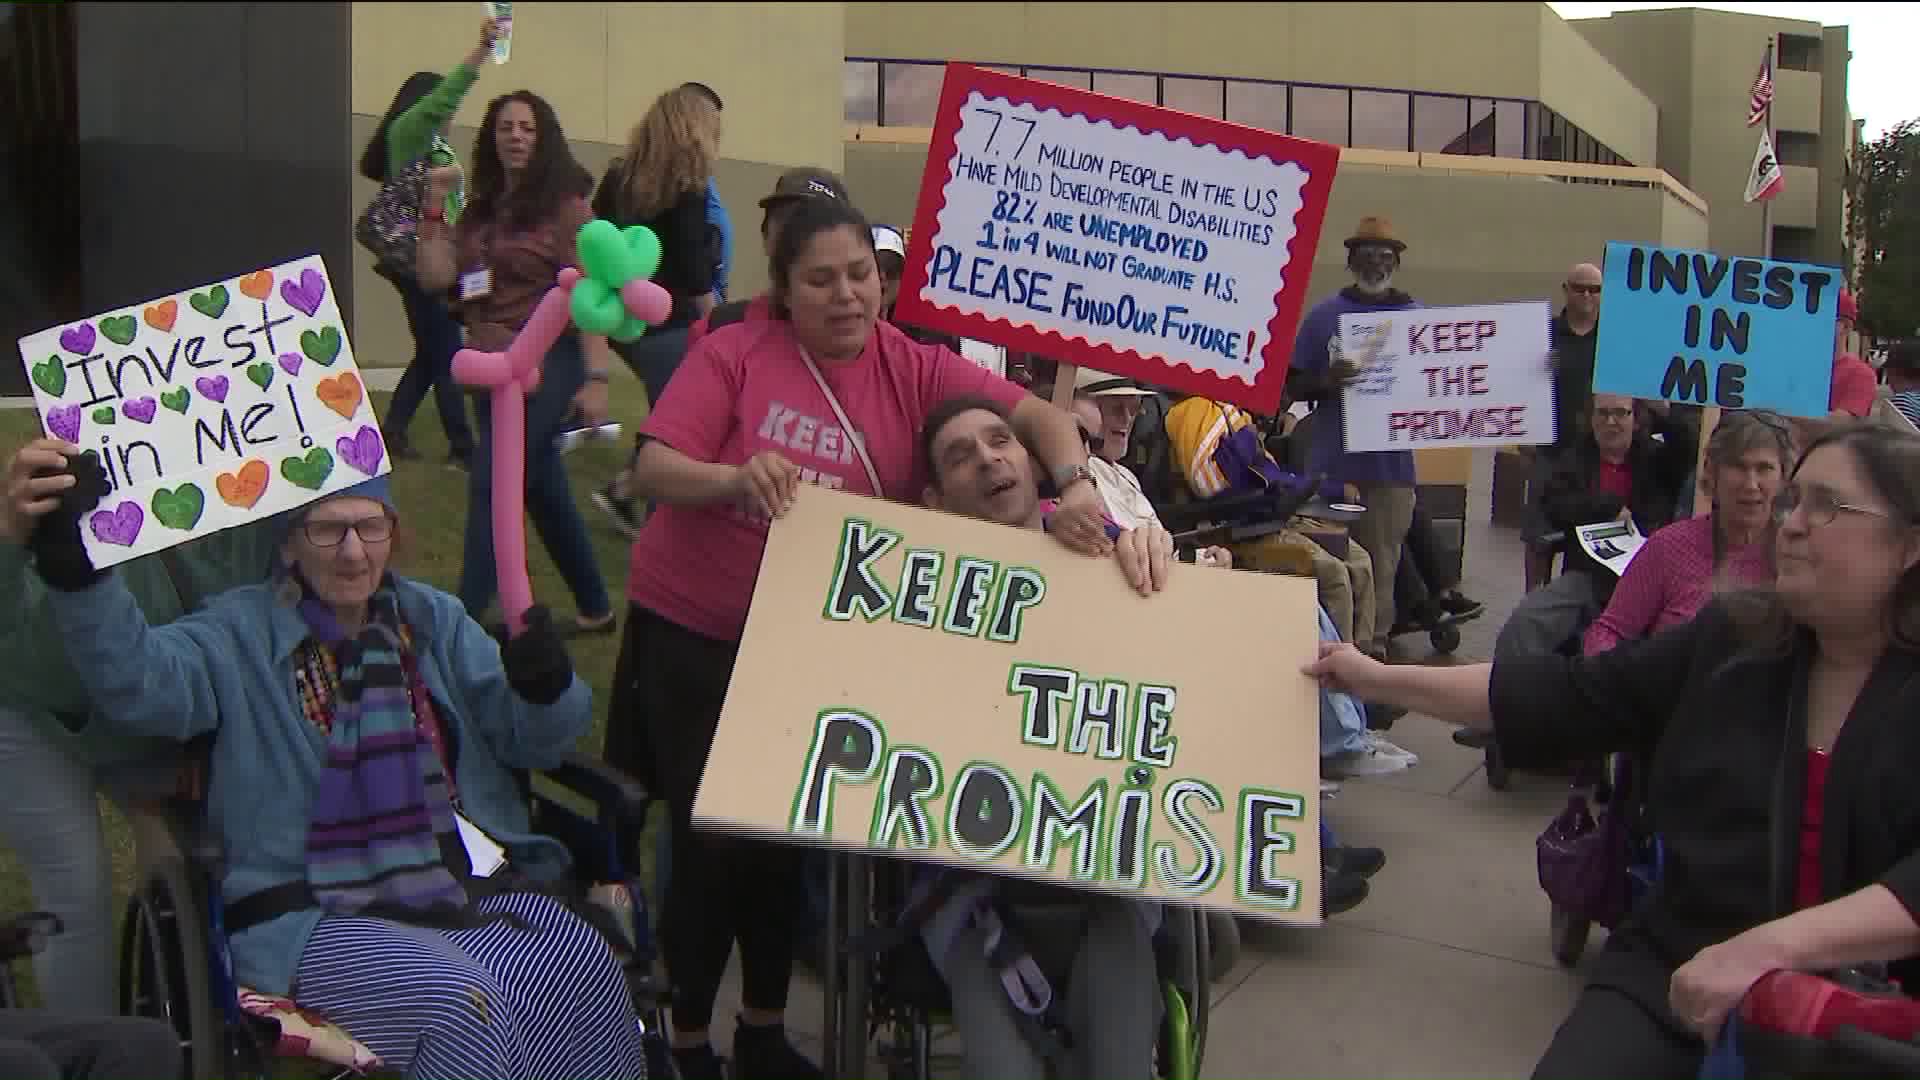 Demonstrators demand increased funding for serviced to help the disabled at a protest outside the state building in Van Nuys on April 5, 2019. (Credit: KTLA)